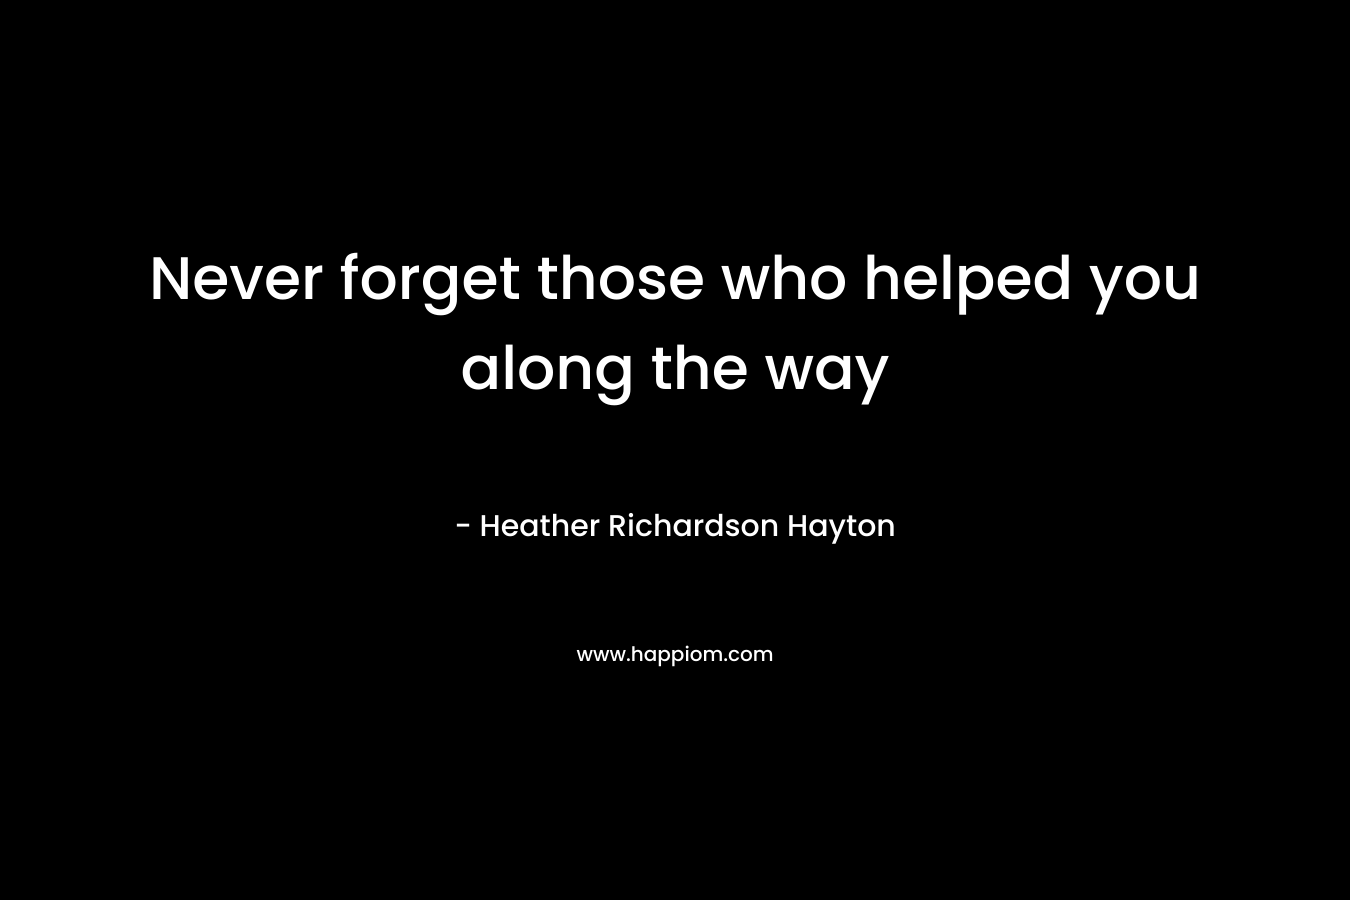 Never forget those who helped you along the way